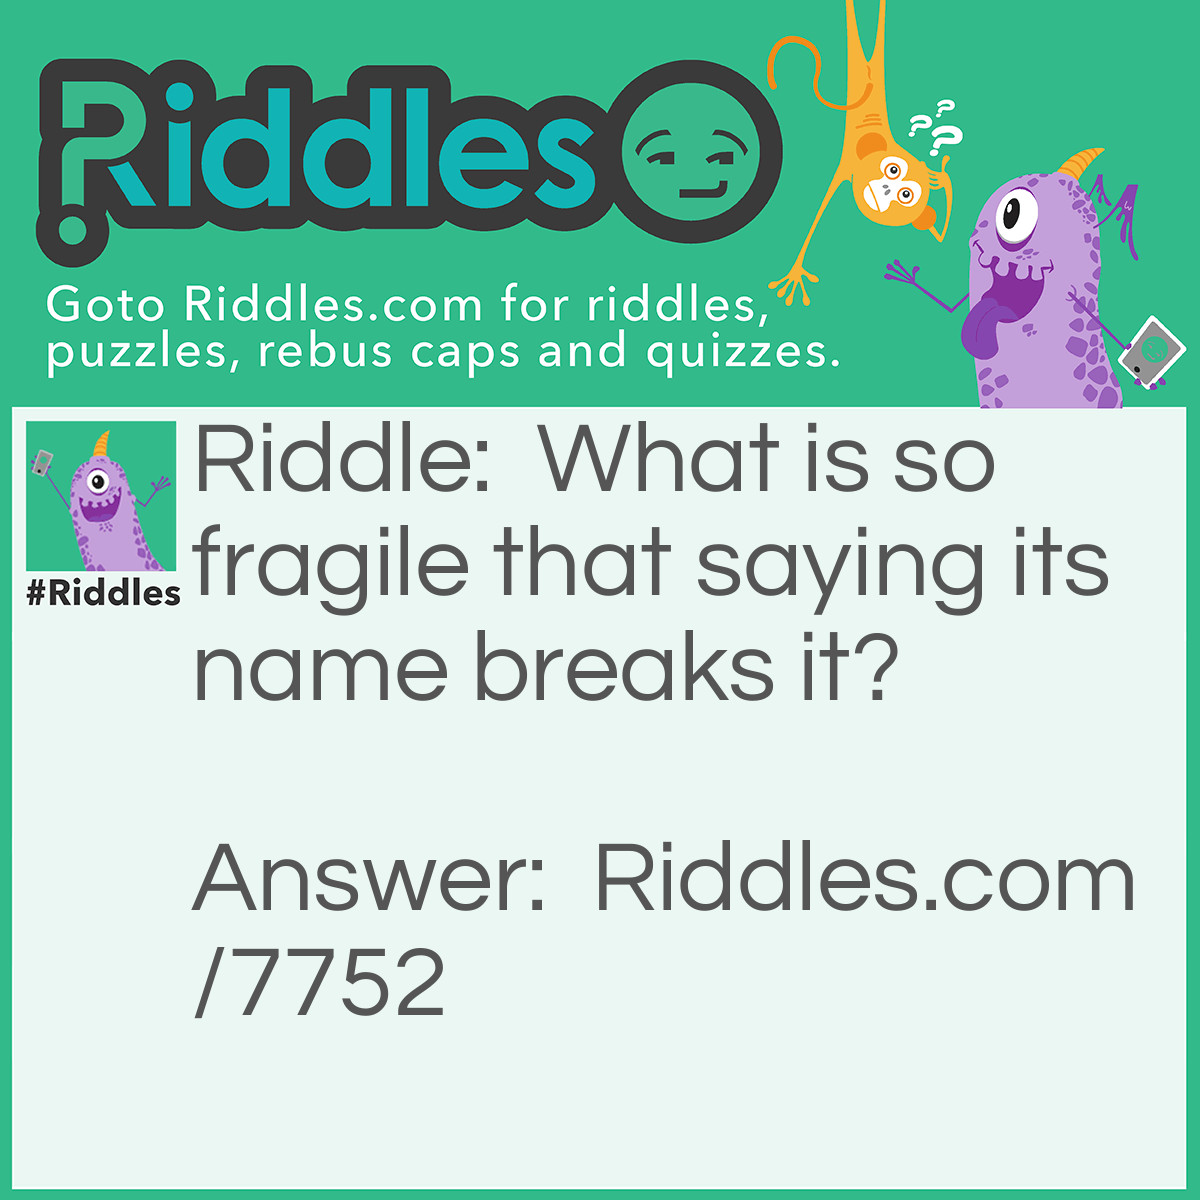 Riddle: What is so fragile that saying its name breaks it? Answer: Silence.